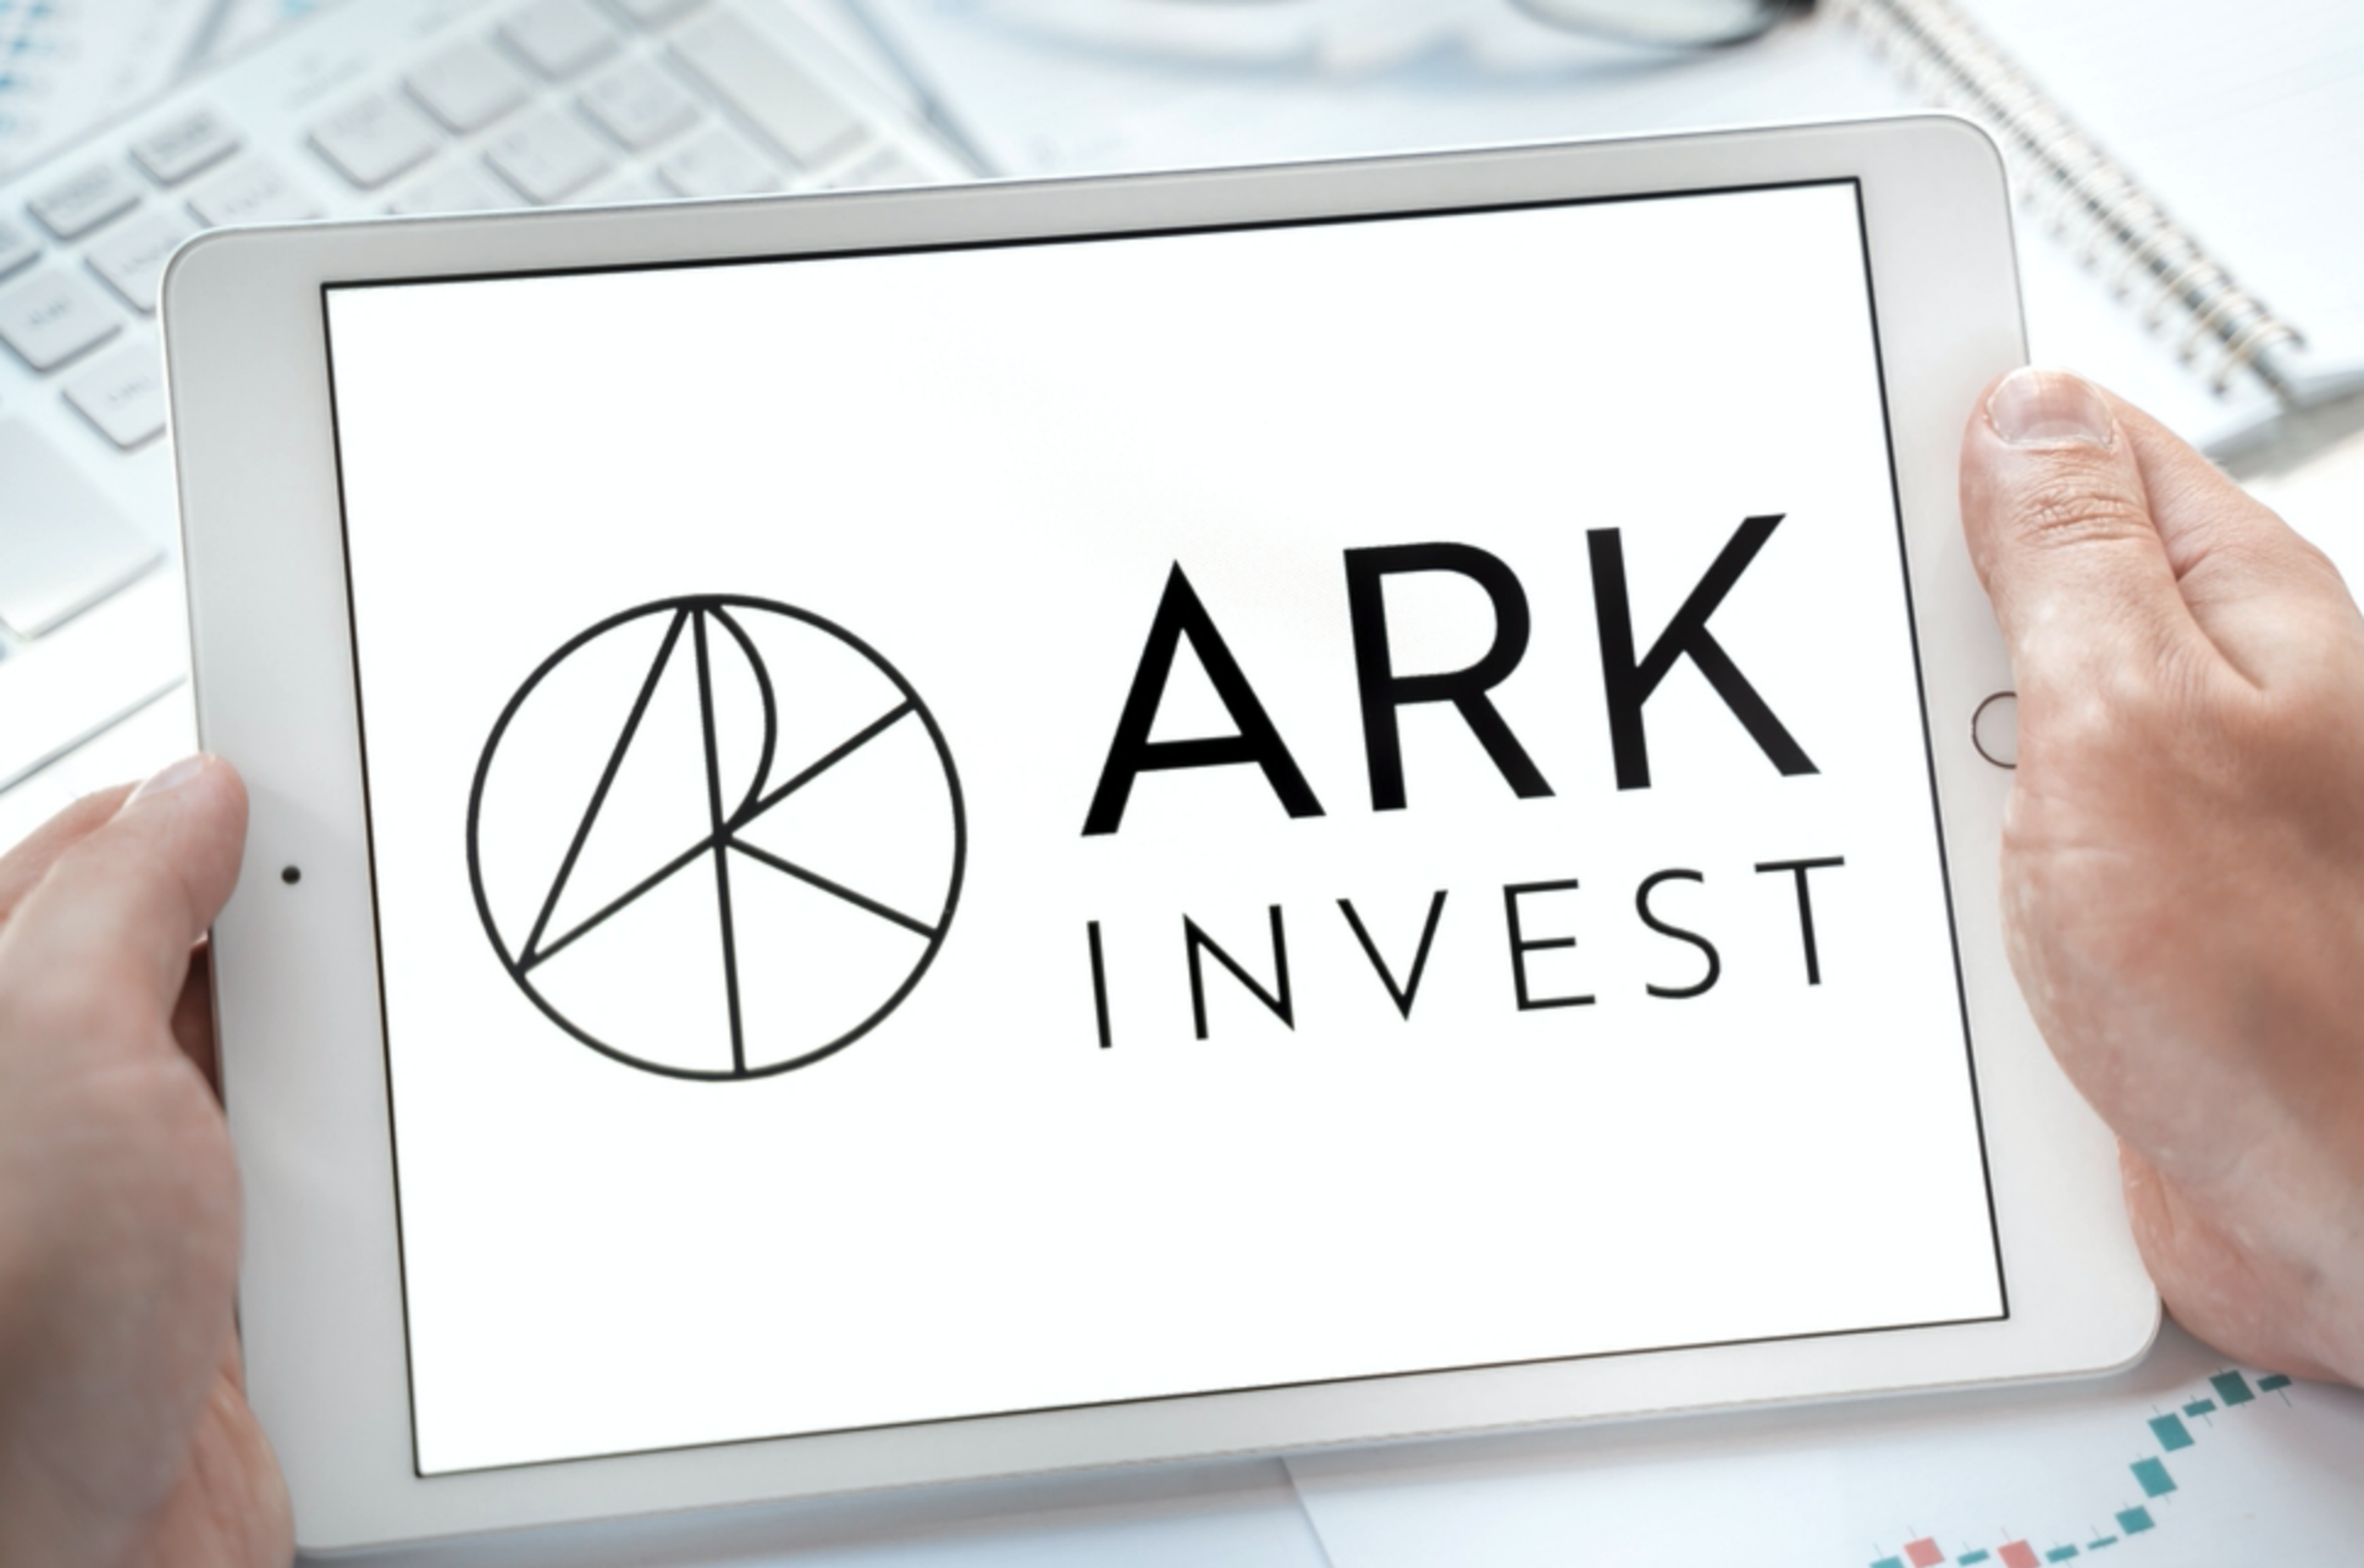 ARK Invest Short Sellers Have $2.3B In Profits So Far In 2022